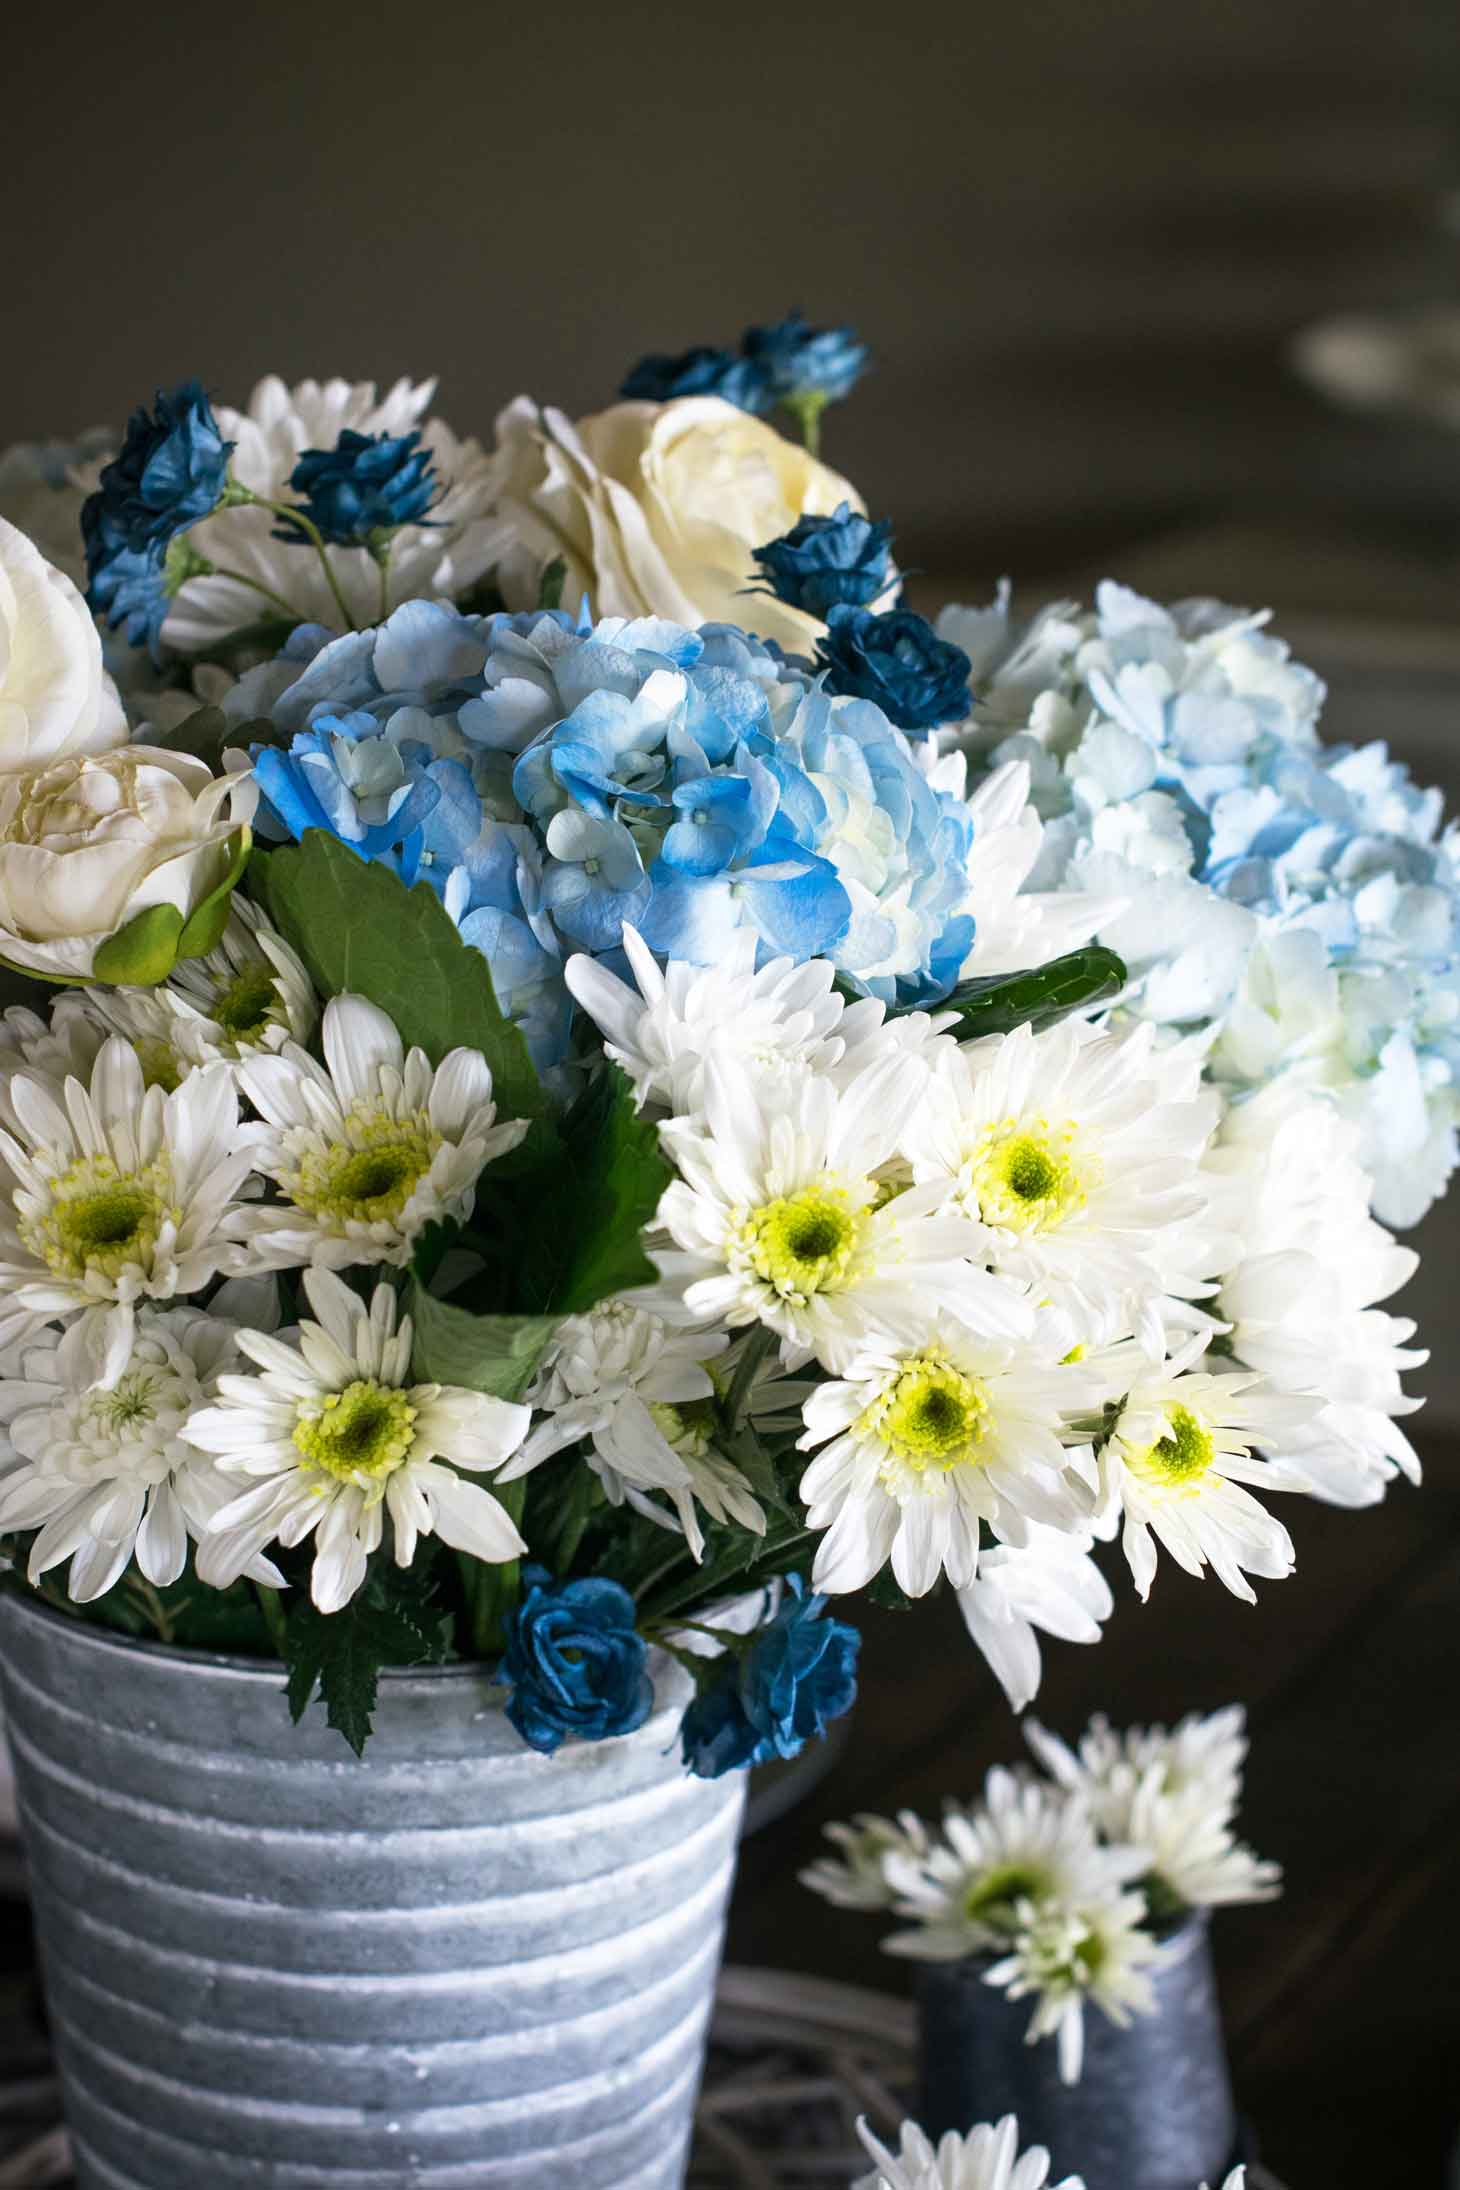 blue and white hydrangea, Euro pops, and more for a spring floral centerpiece